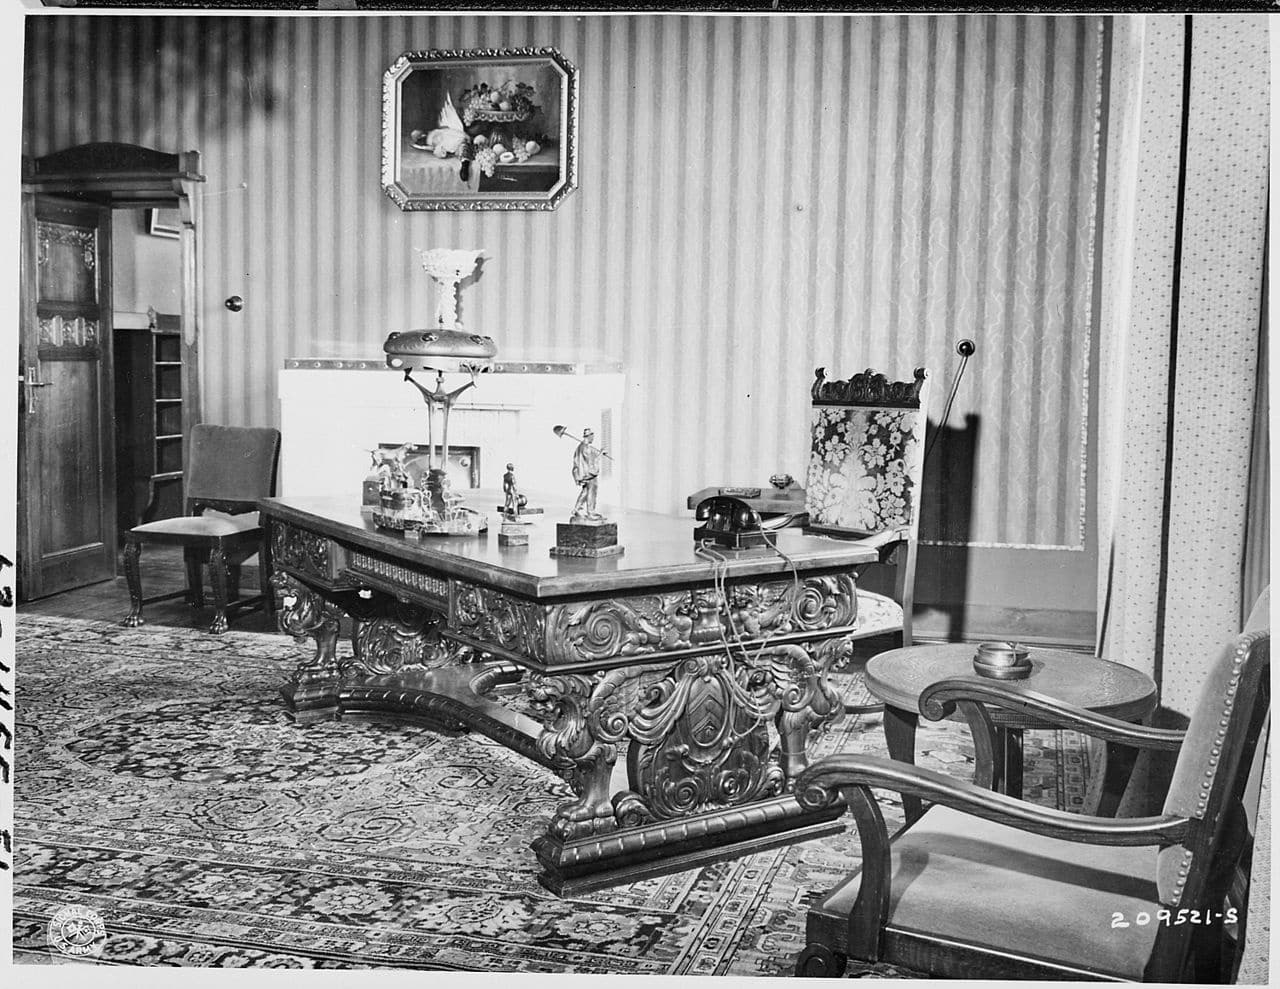 The Potsdam Conference - July 23rd 1945 - A hand carved desk sat in Harry Truman's office in the 'Little White House' during the Potsdam Conference